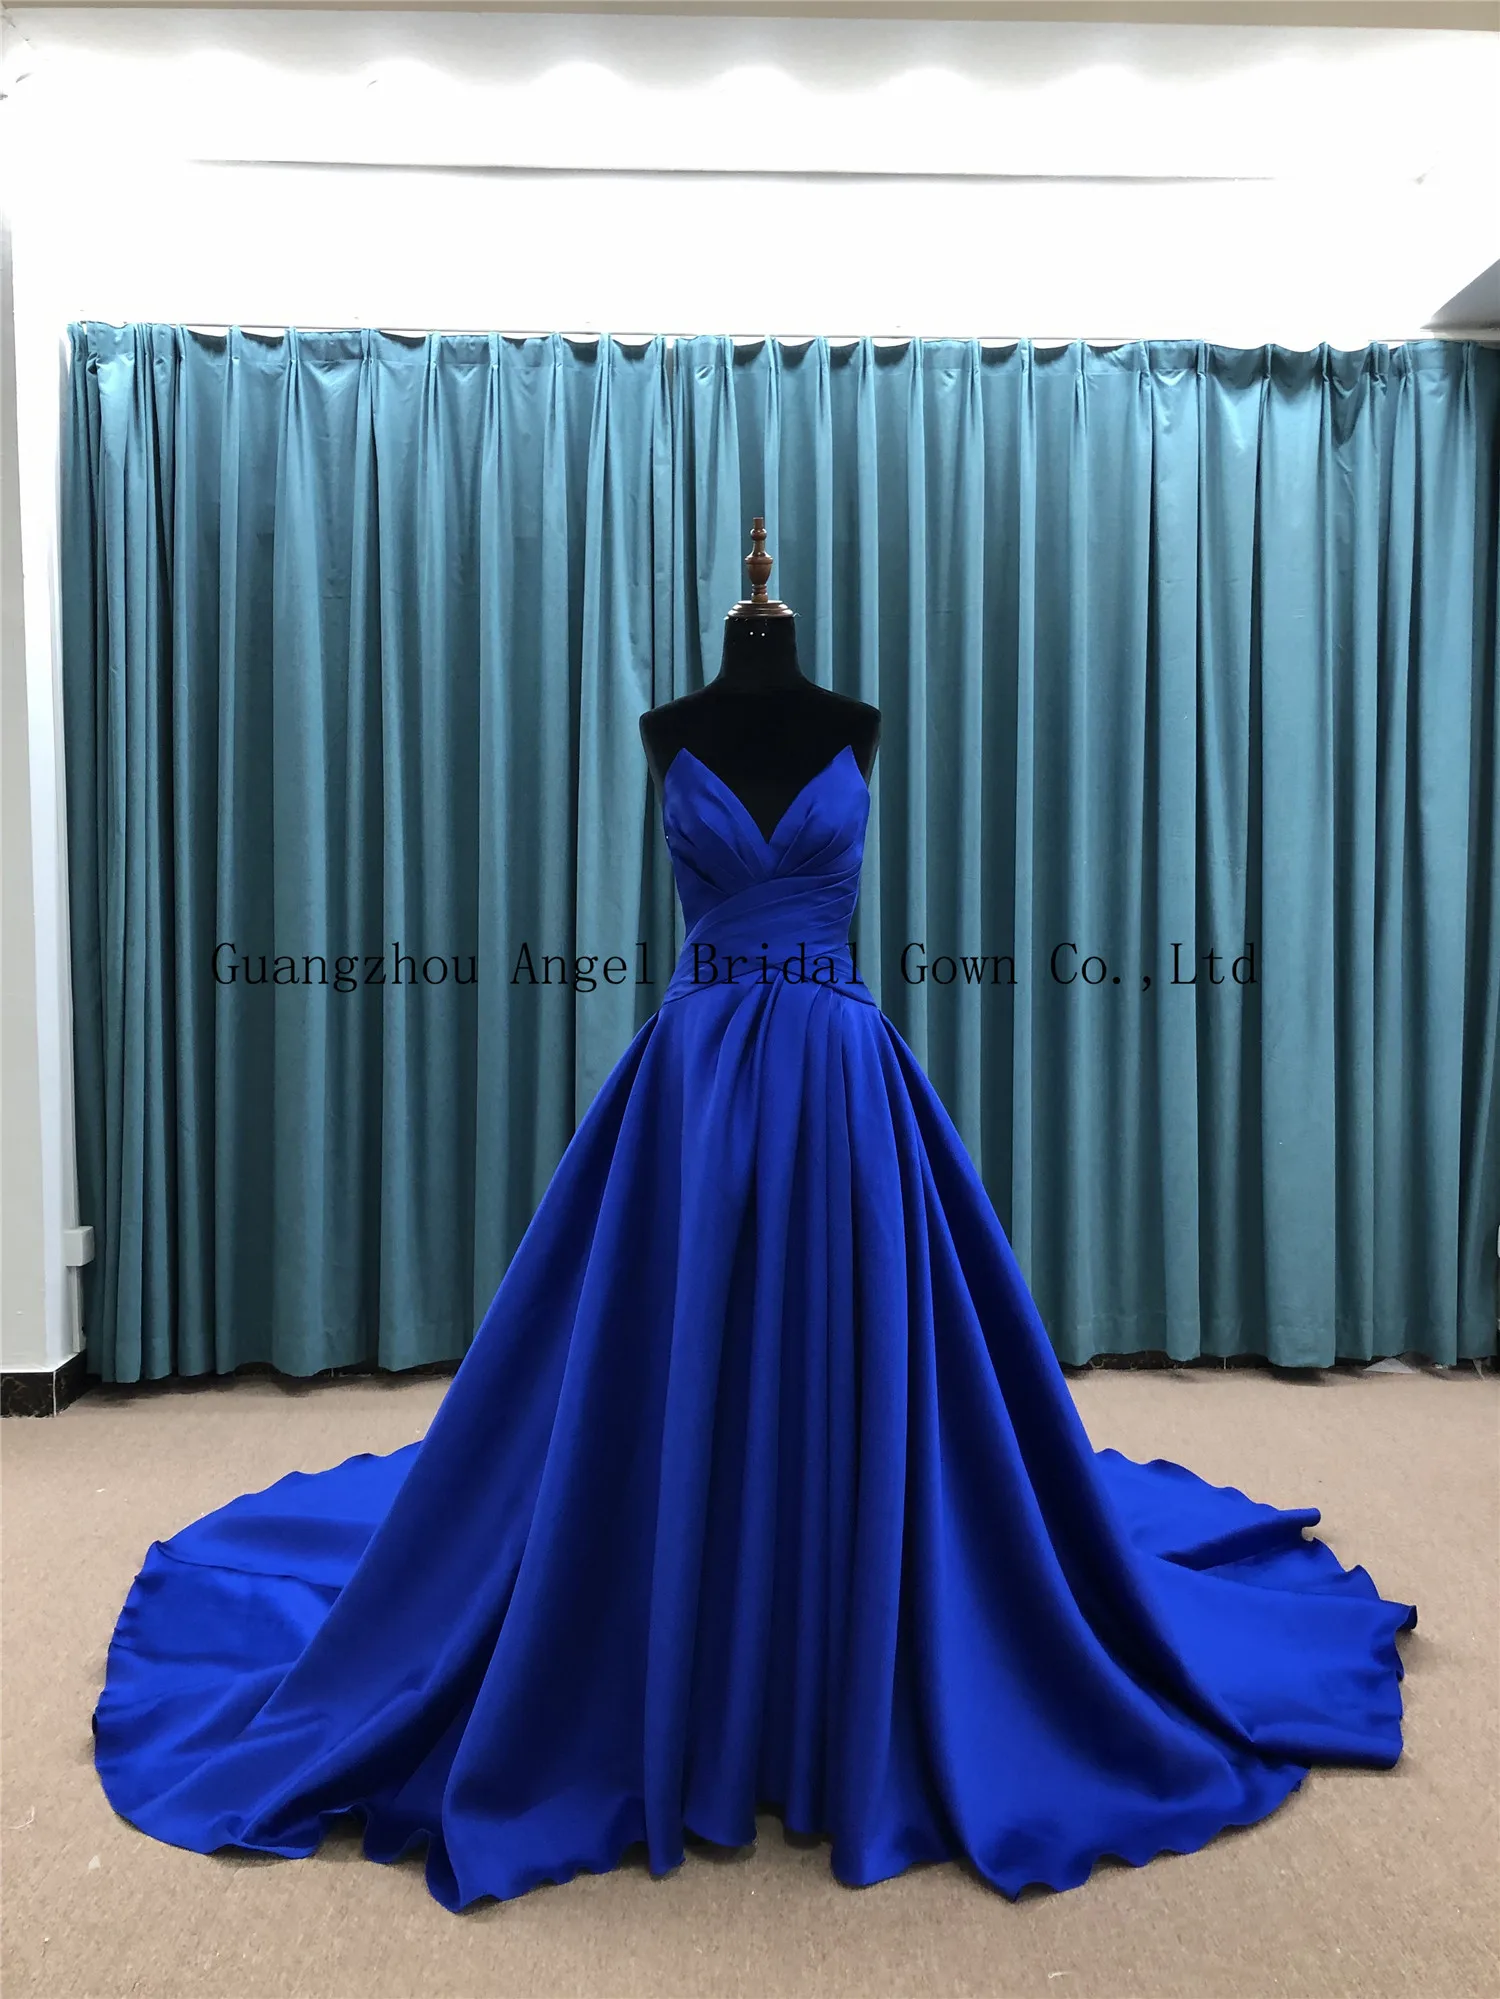 Goes royal blue what with dress color 10 of